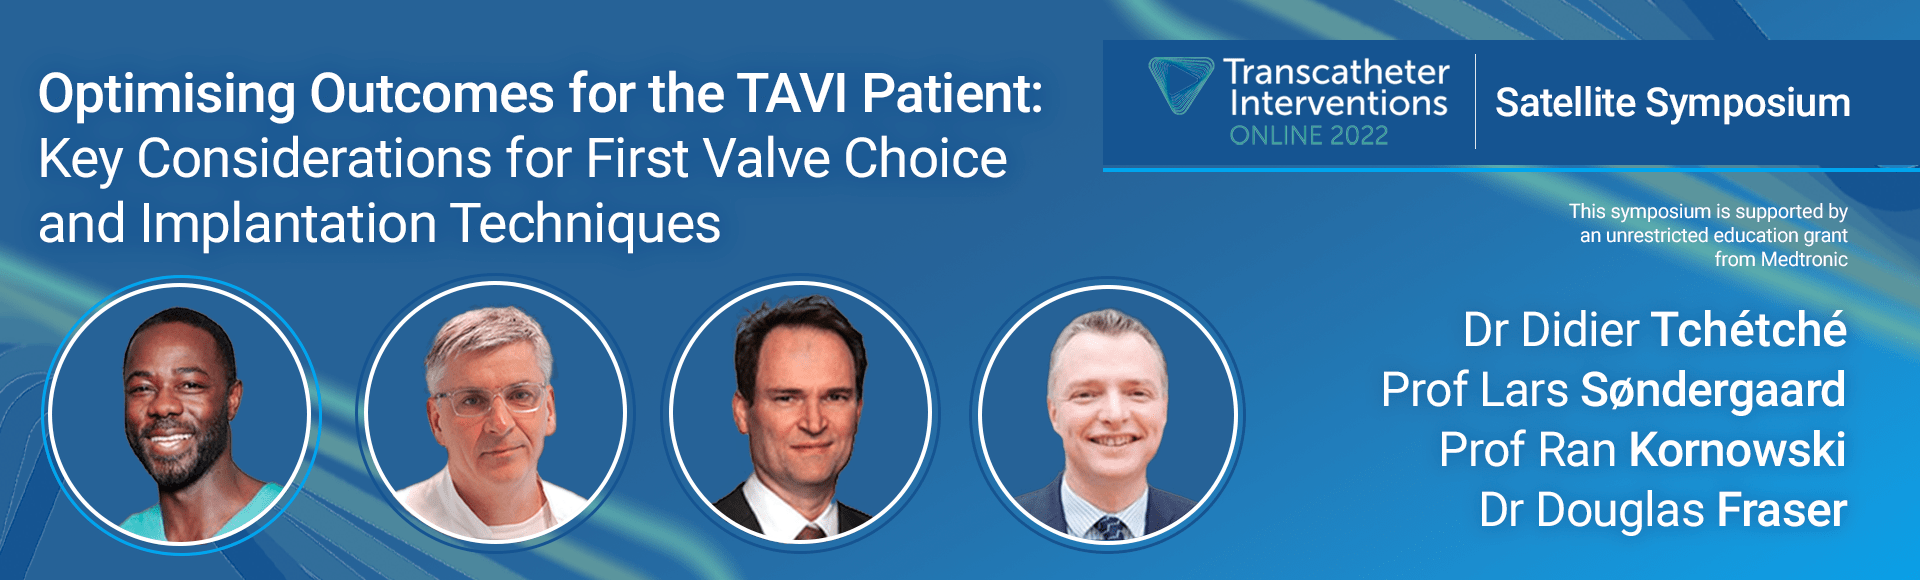 Optimising Outcomes For The TAVI Patient: Key Considerations For First Valve Choice And Implantation Techniques